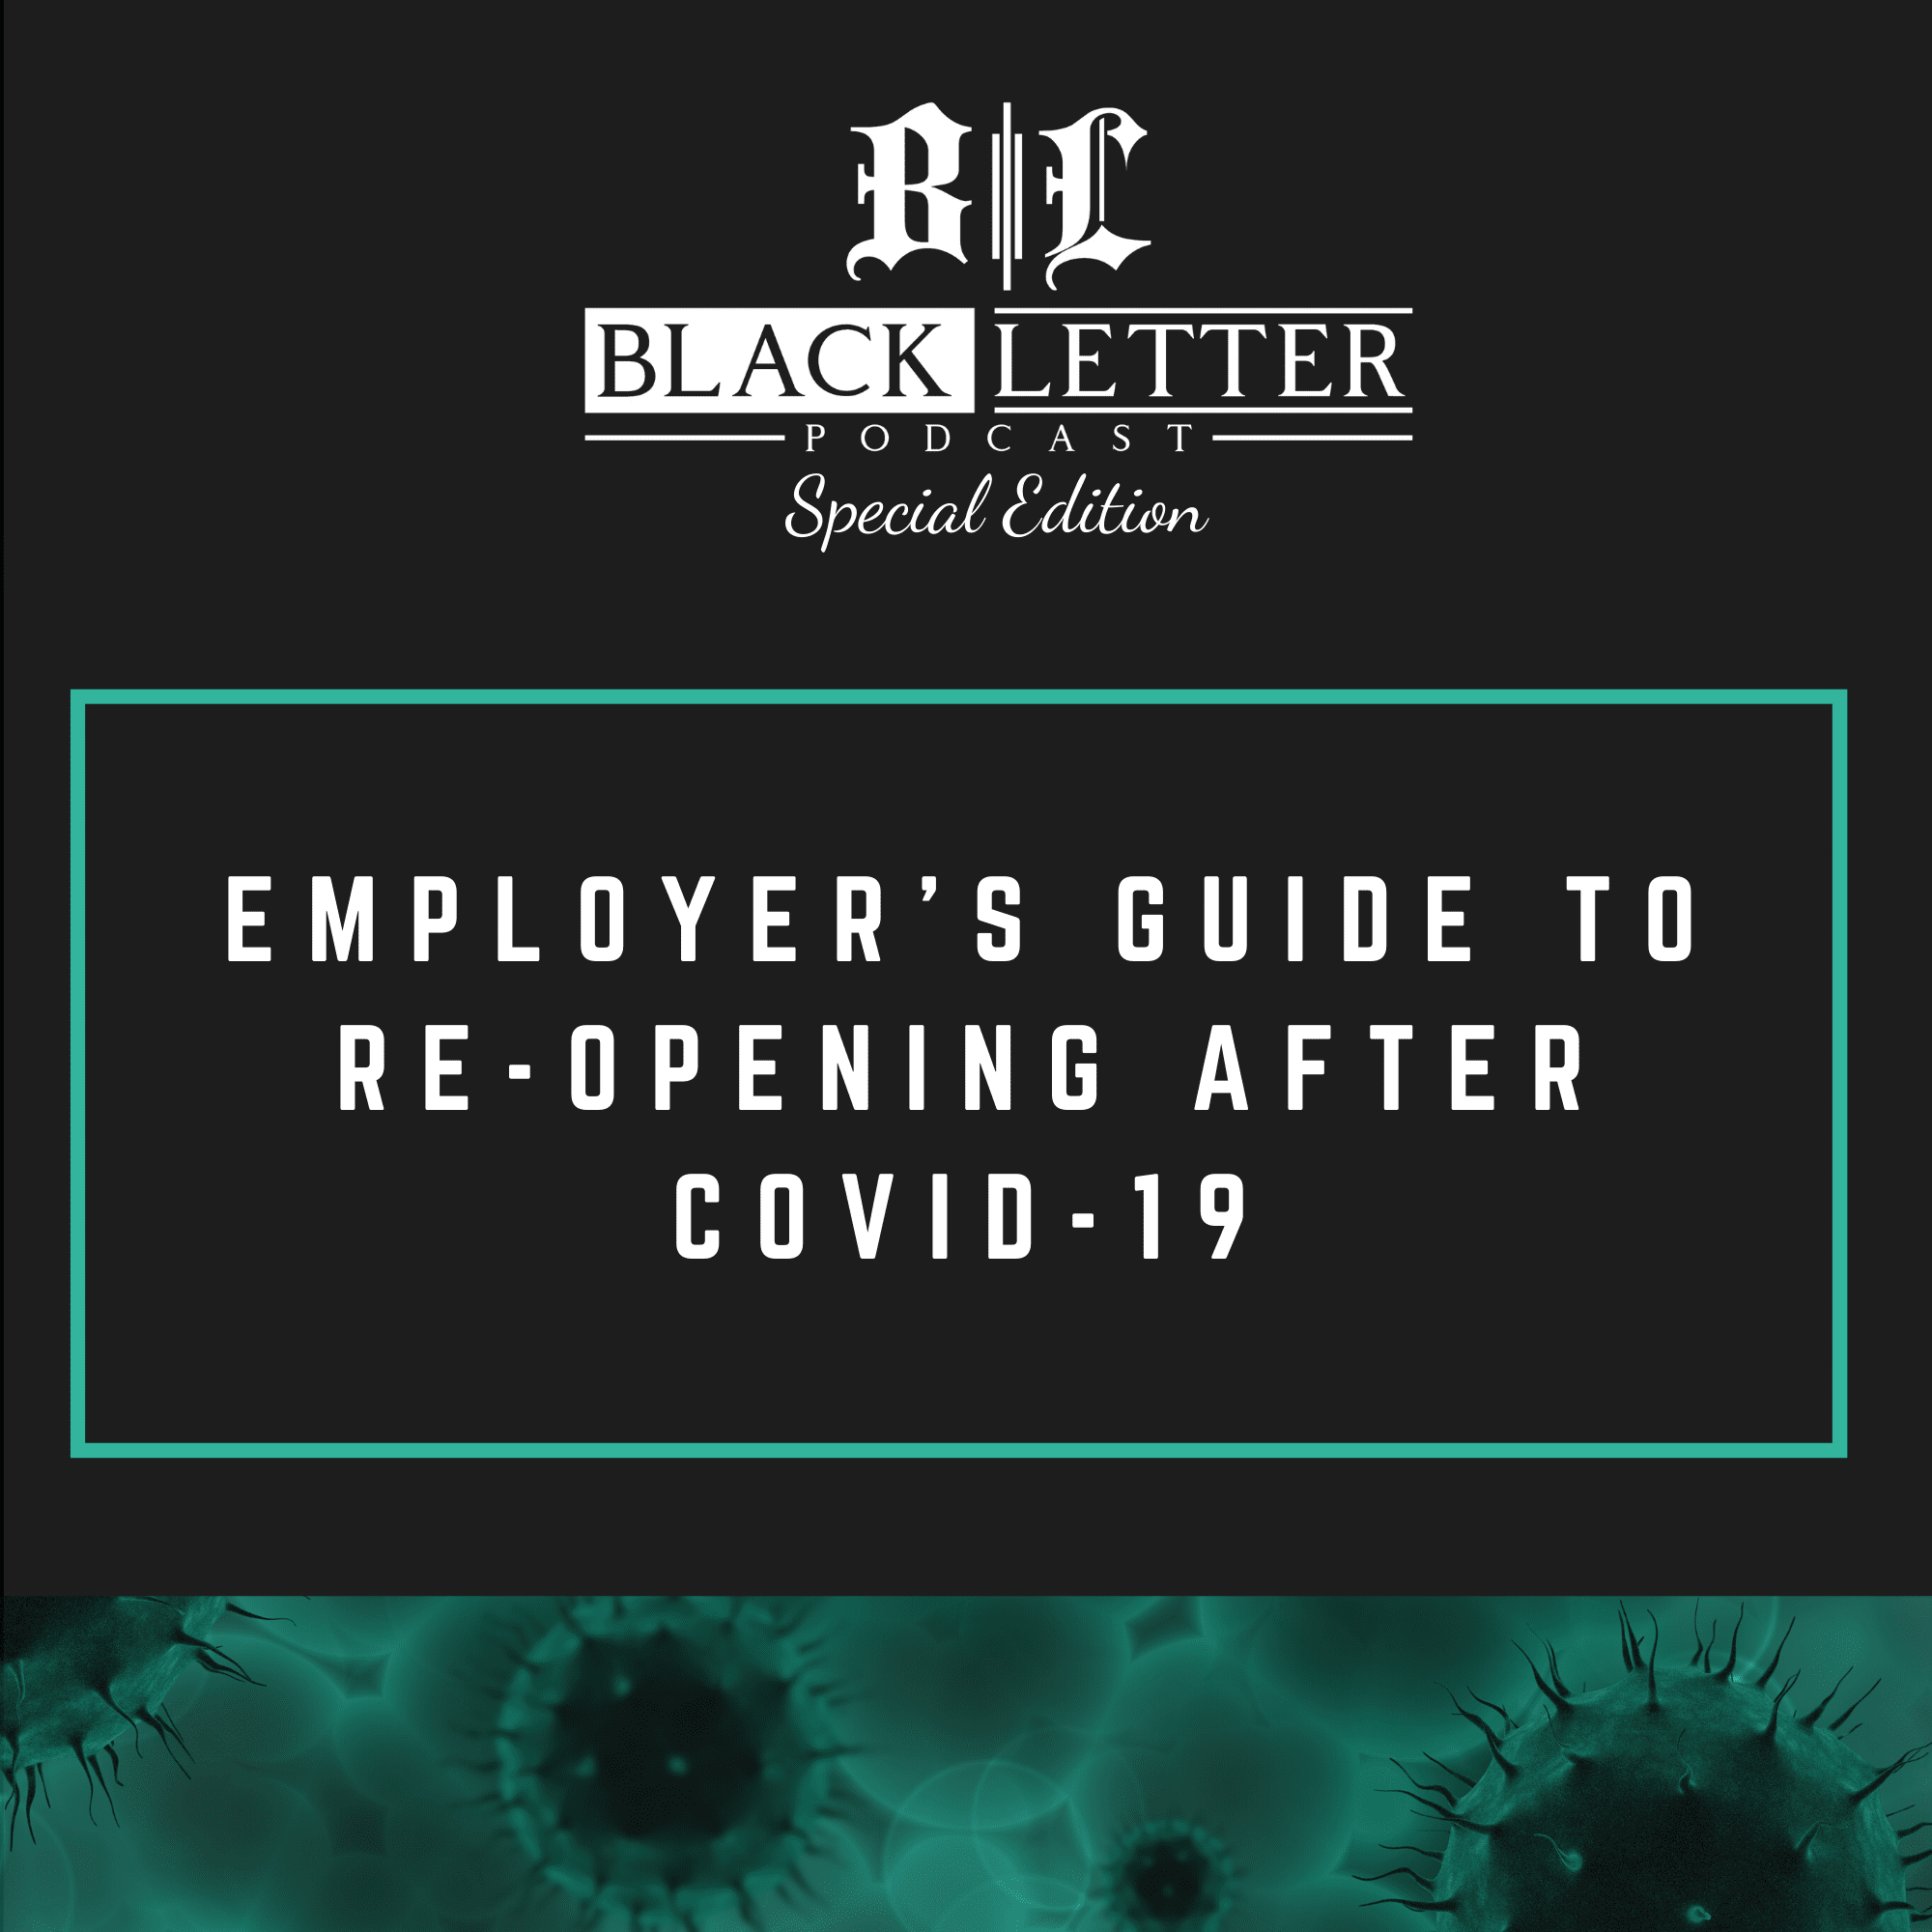 Employer's Guide to Re-Opening After Covid-19